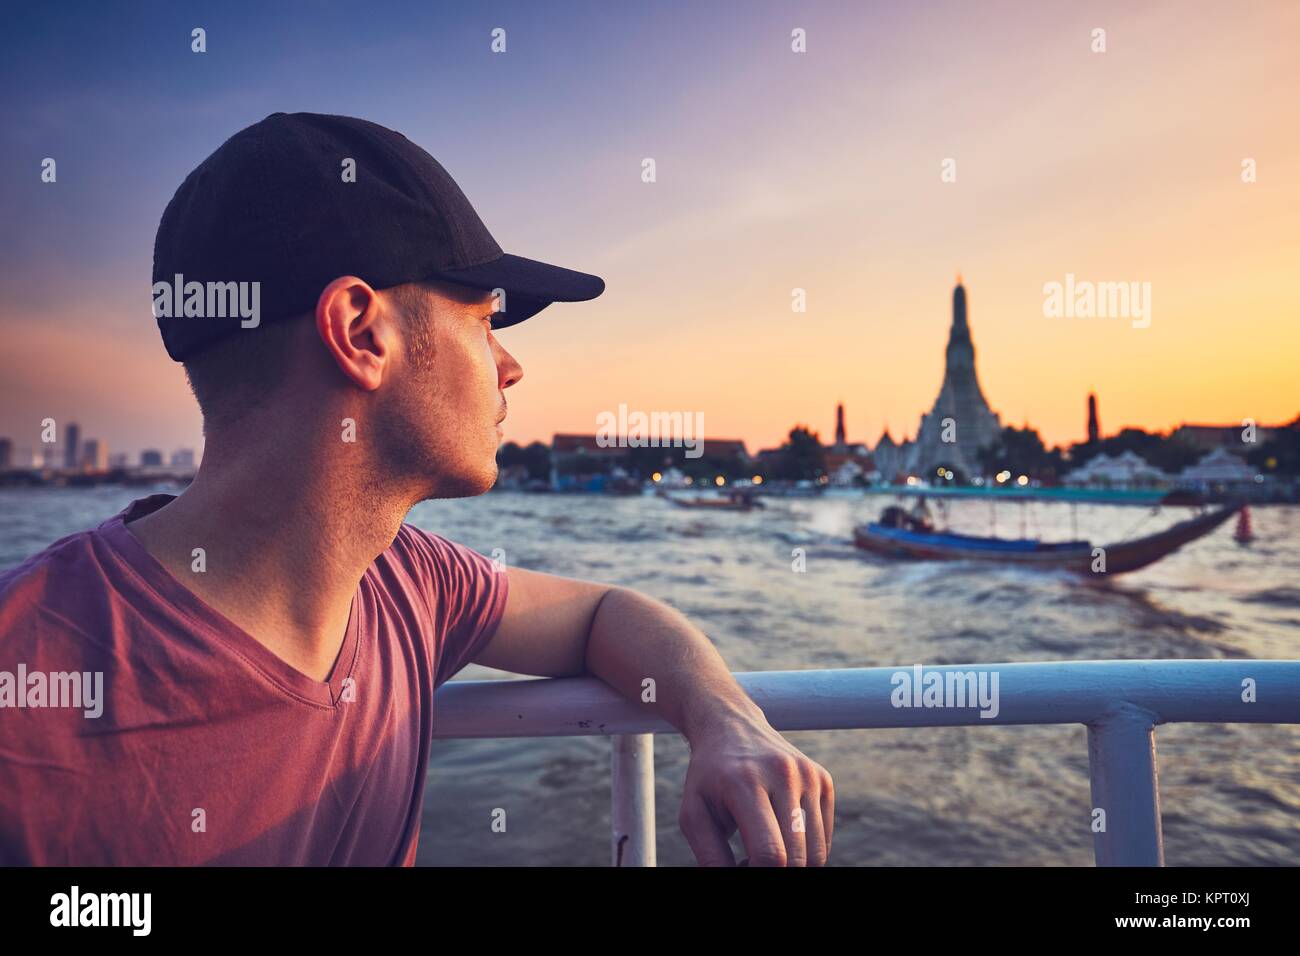 Young man (tourist) on the boat watching the traditional boats against temple Wat Arun. Bangkok at the sunset, Thailand. Stock Photo